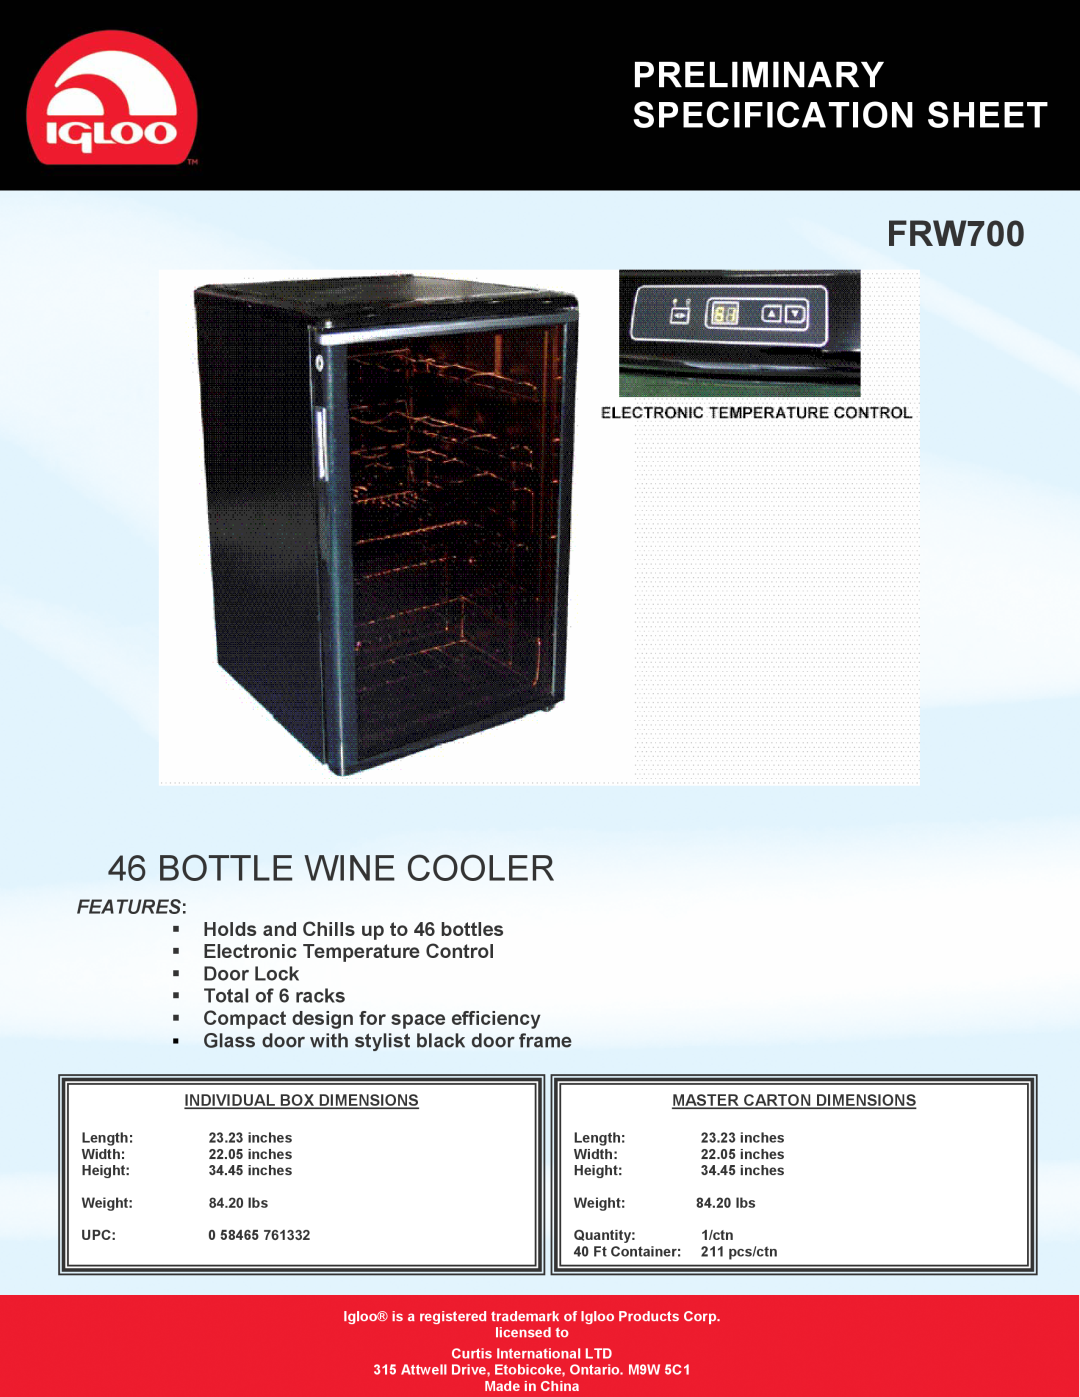 Curtis FRW700 specifications Preliminary Specification Sheet, Bottle Wine Cooler, Features, ƒTotal of 6 racks 